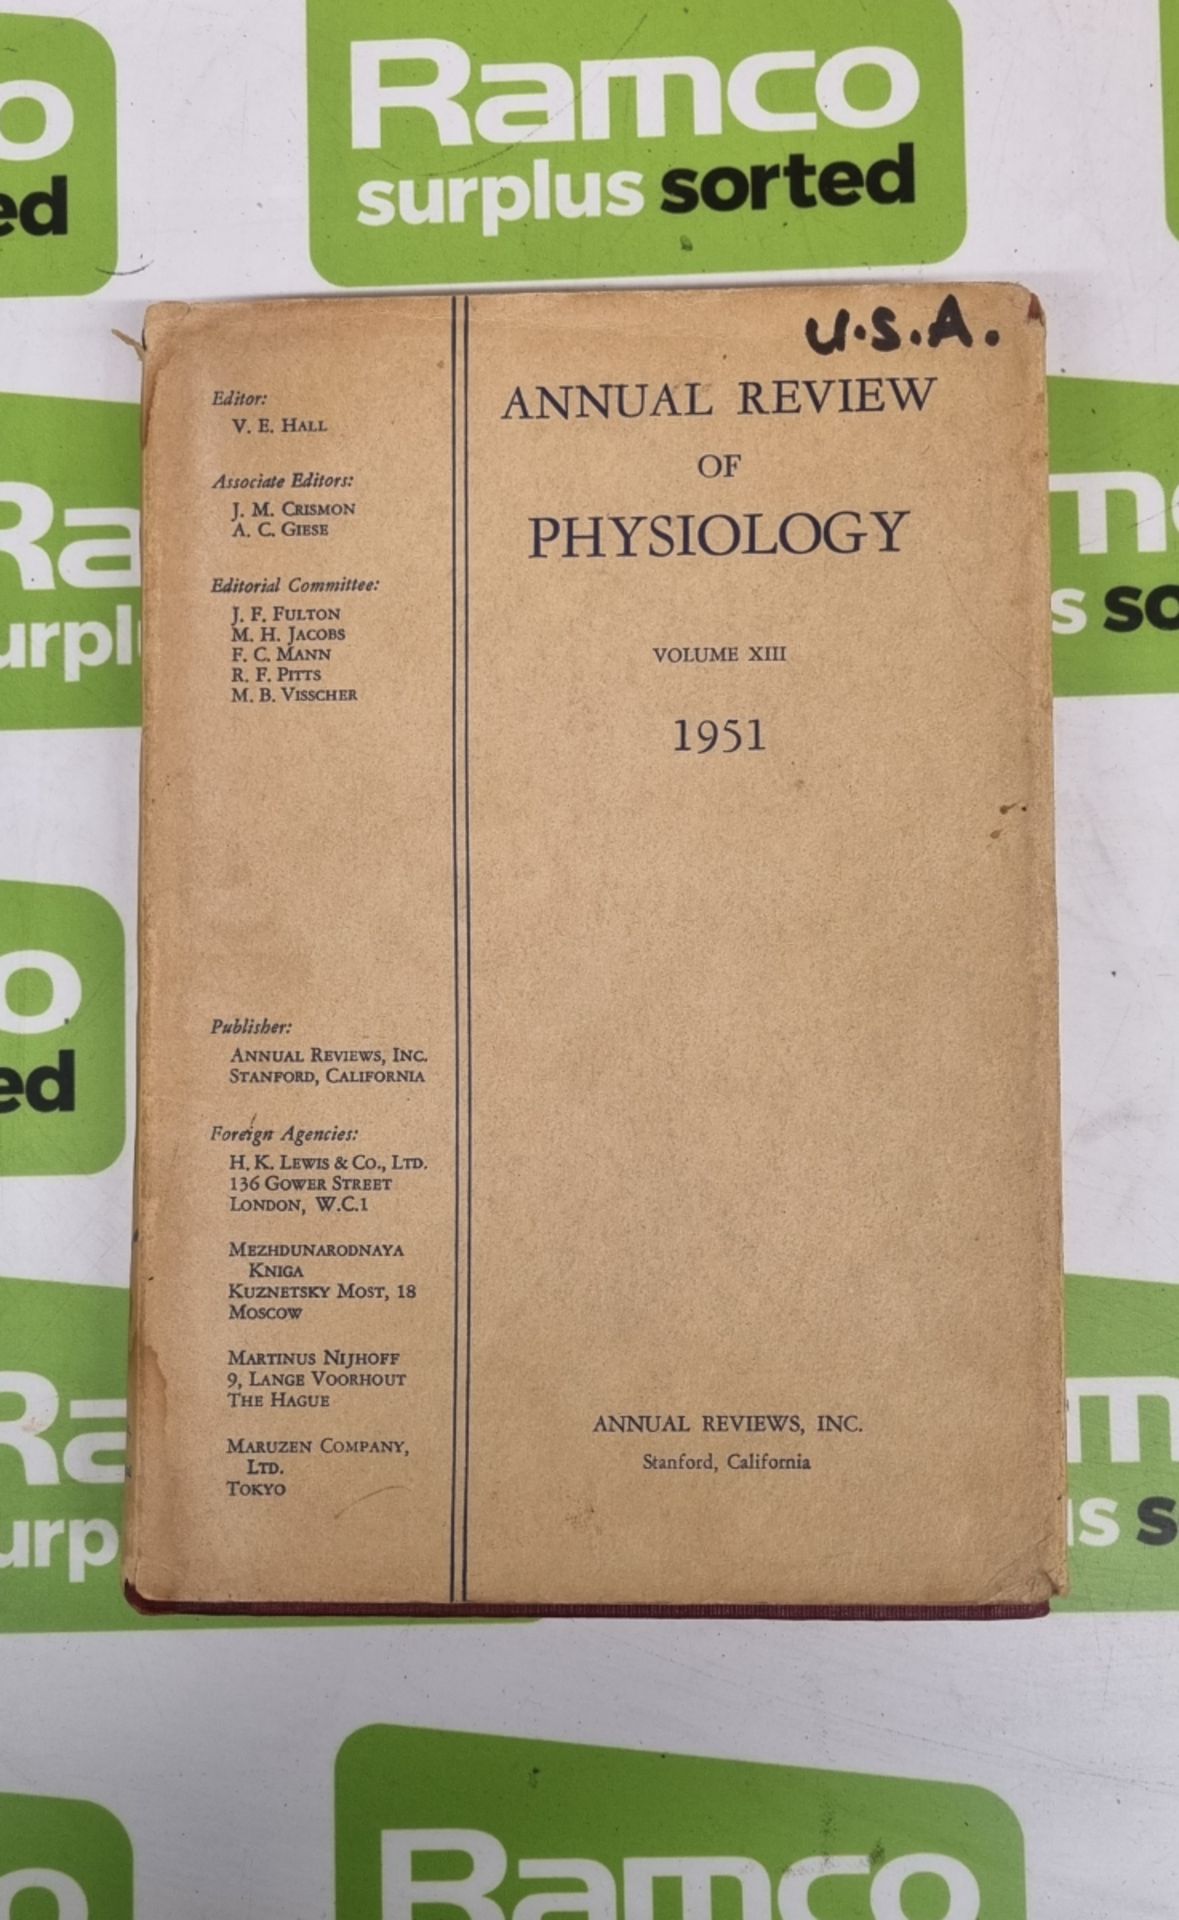 Annual Reviews of Physiology books - Volumes 13 to 35 - Image 4 of 6